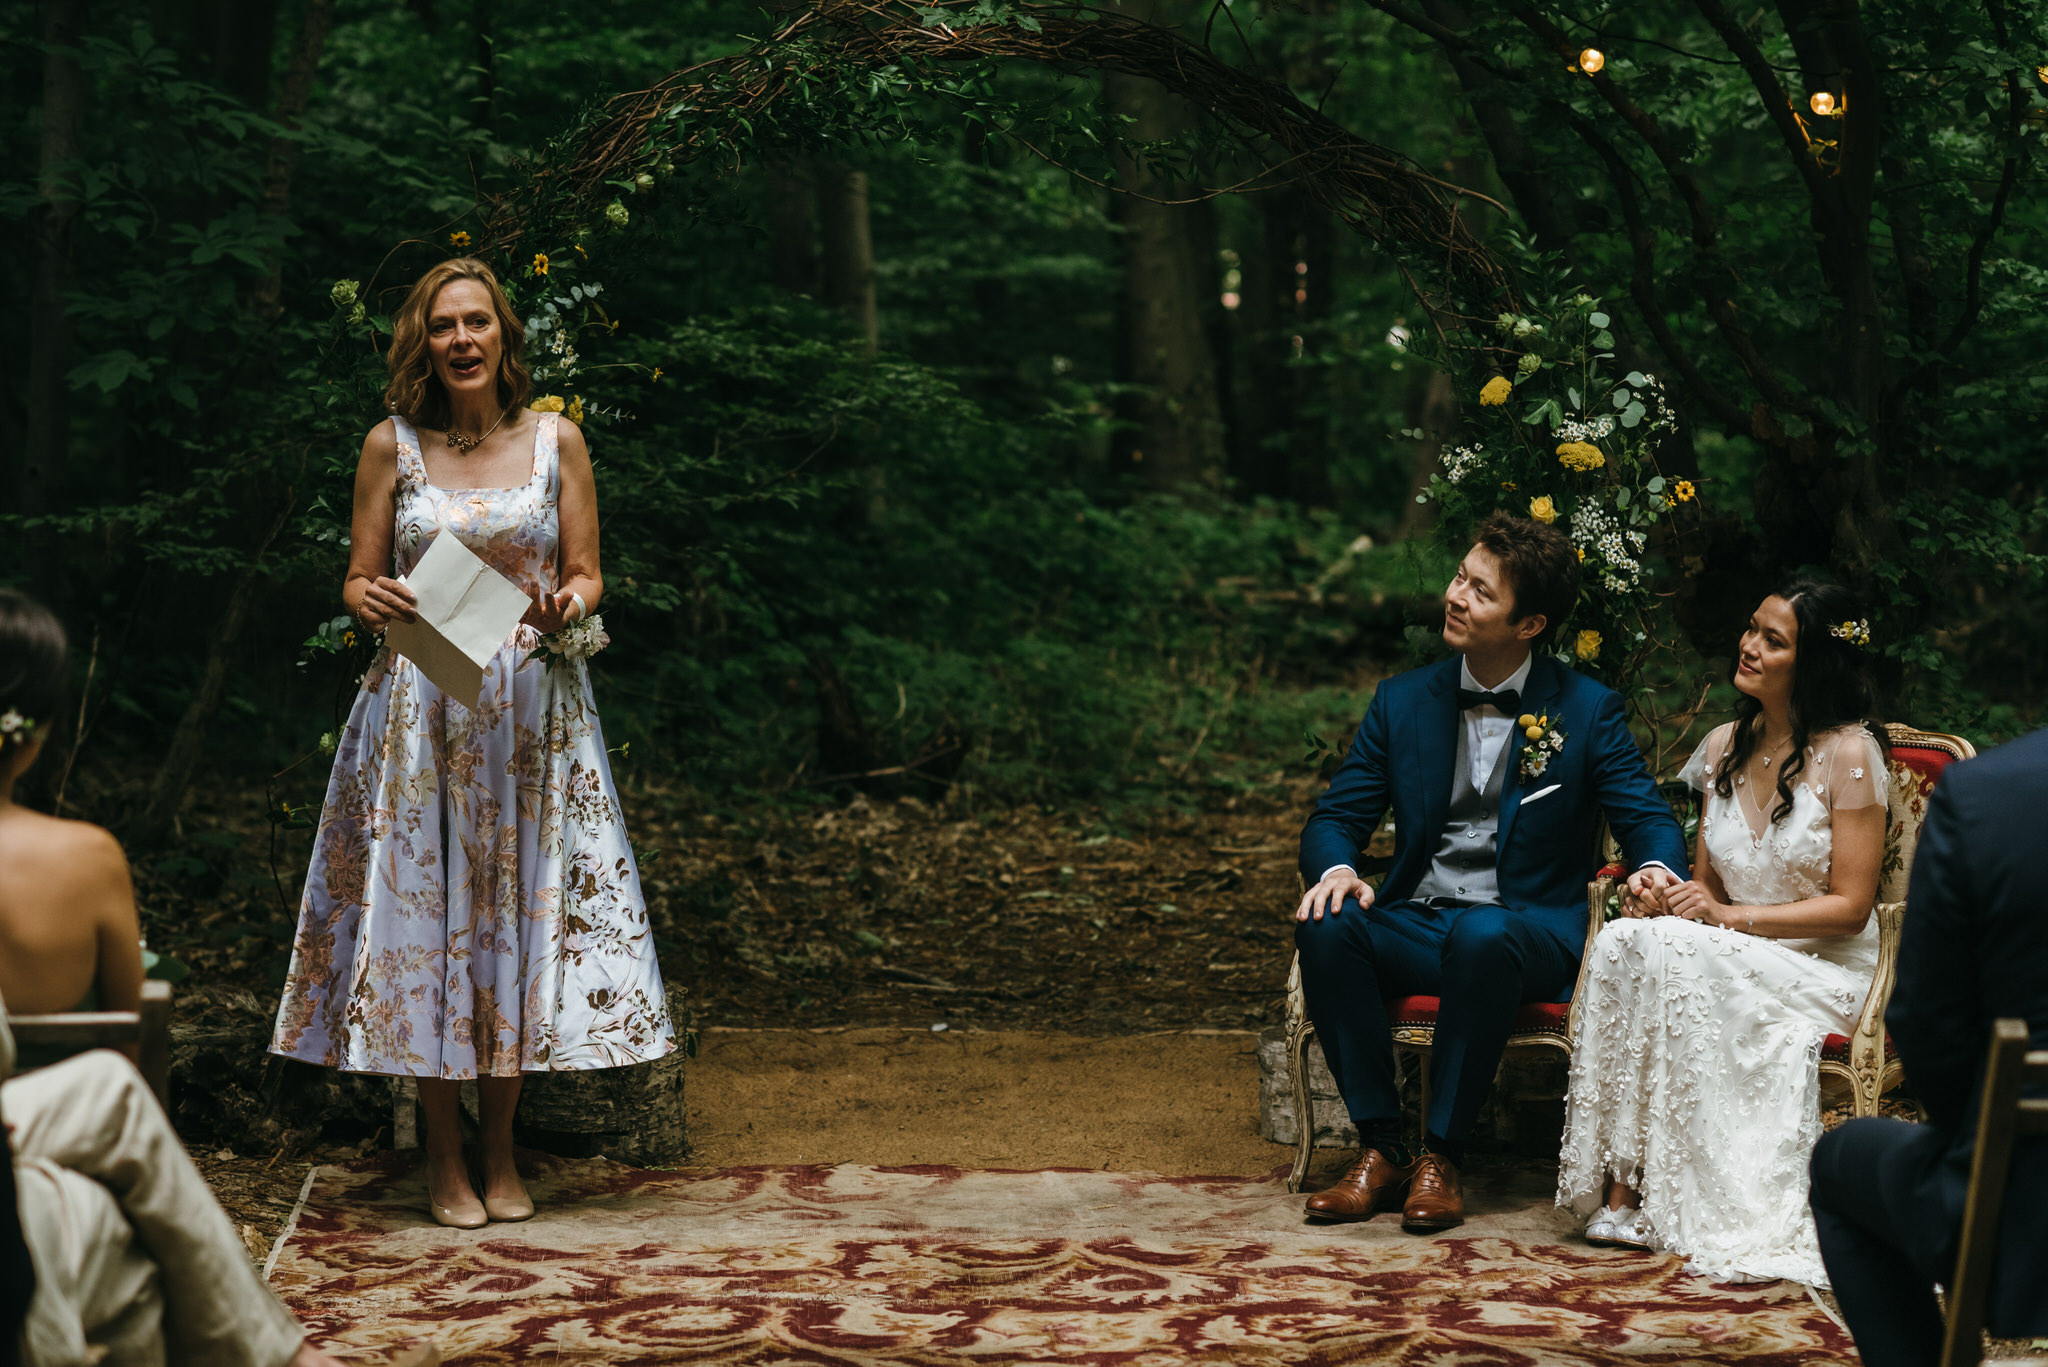 The dreys wedding ceremony in the woods